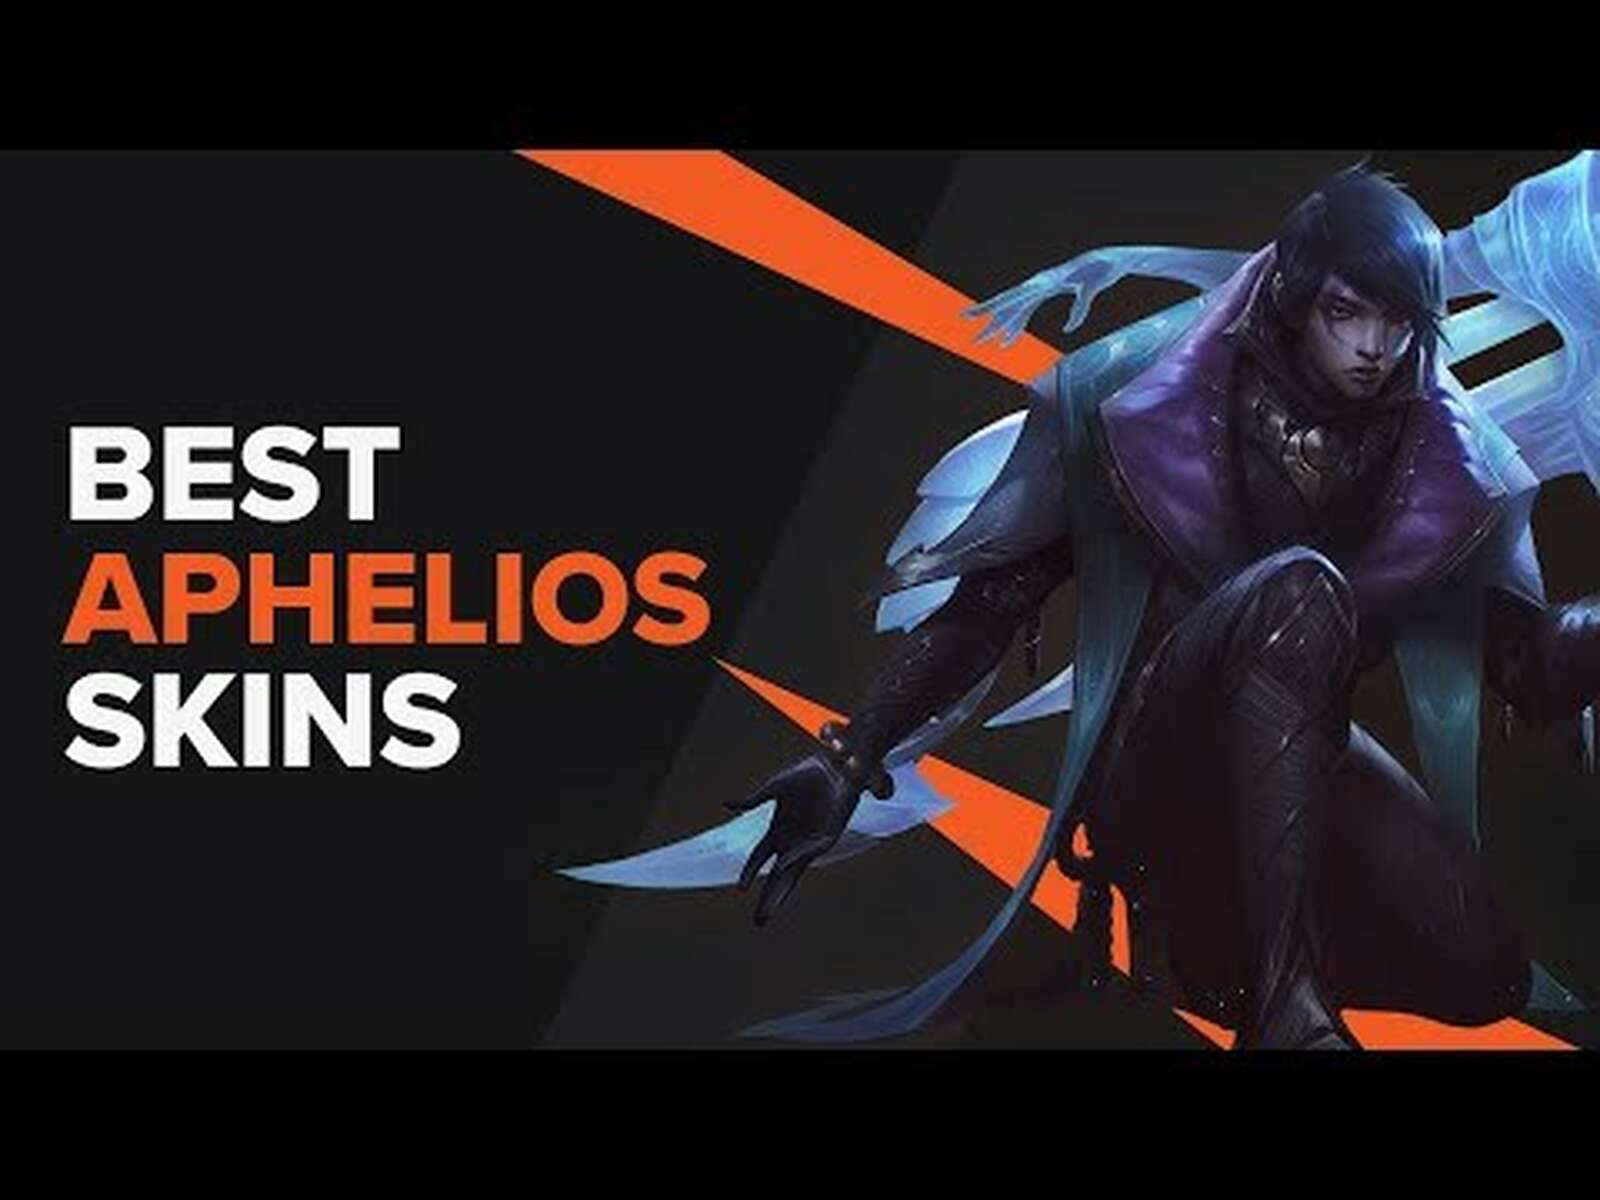 The Best Aphelios Skins in League of Legends